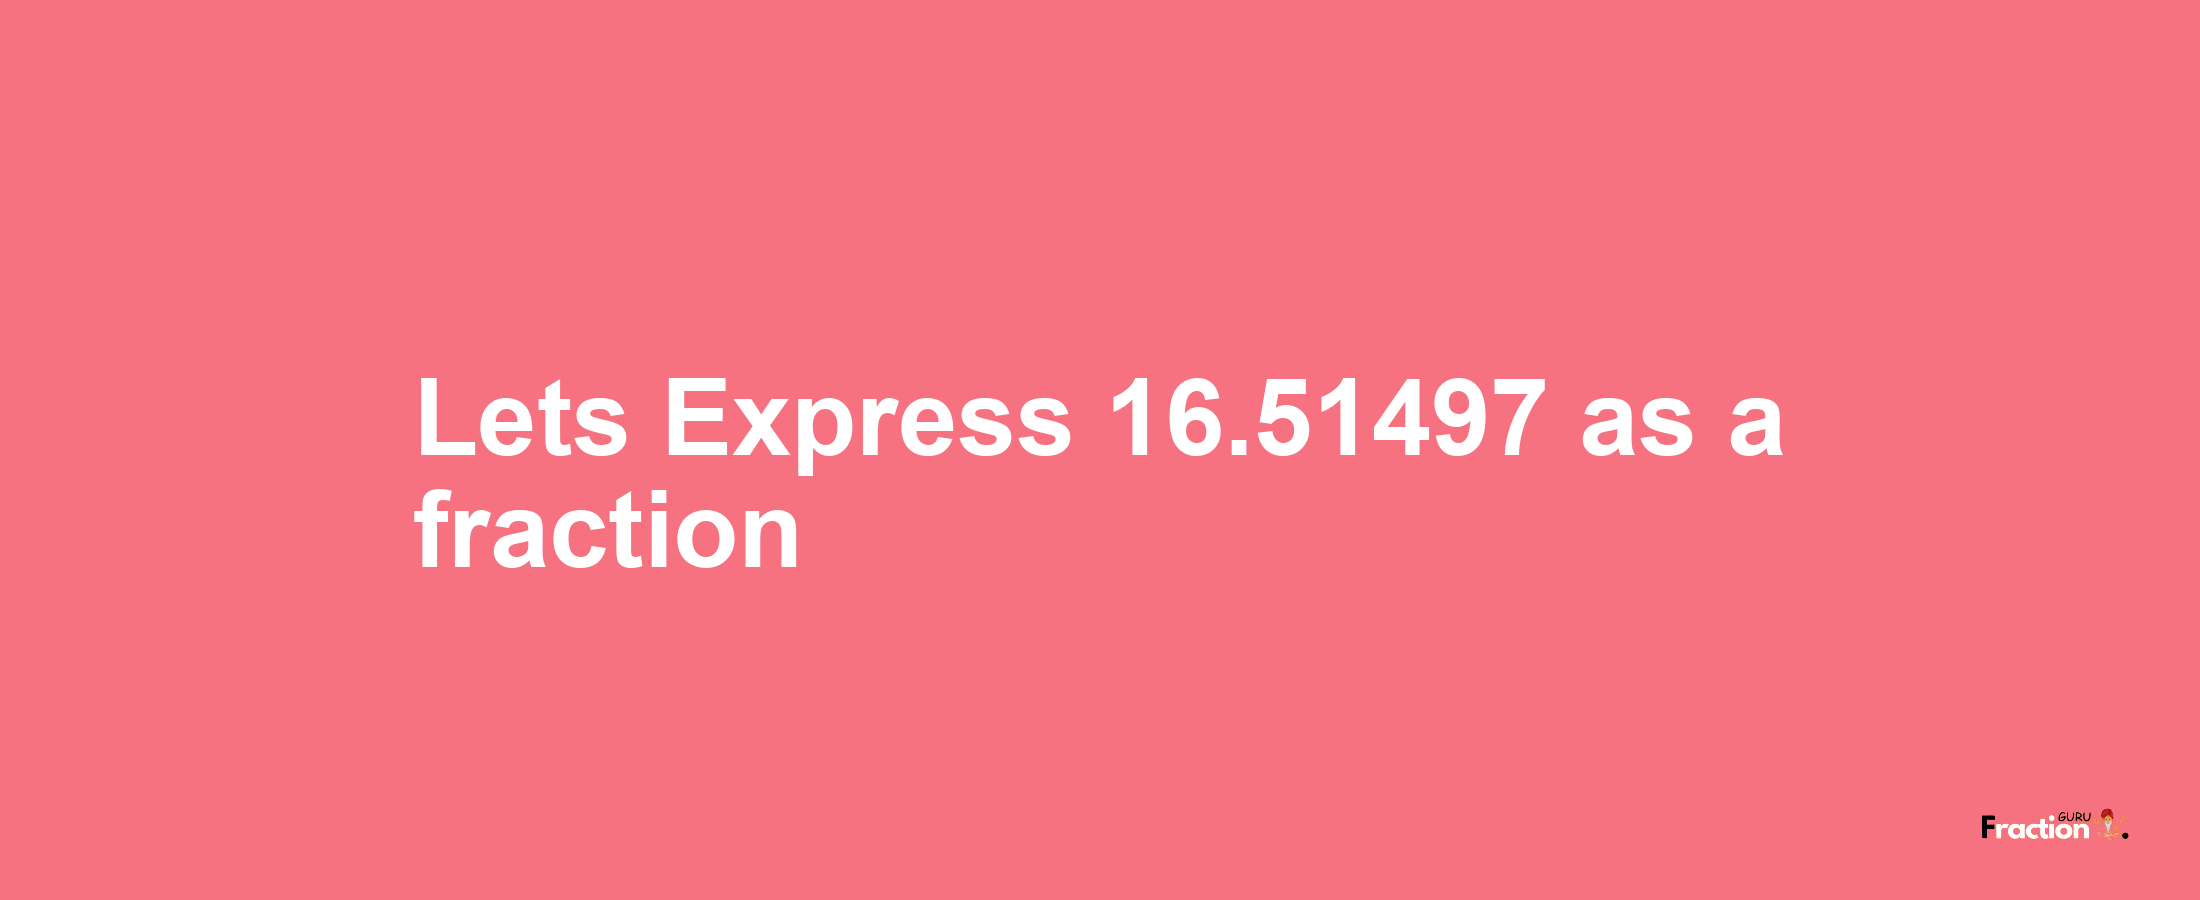 Lets Express 16.51497 as afraction